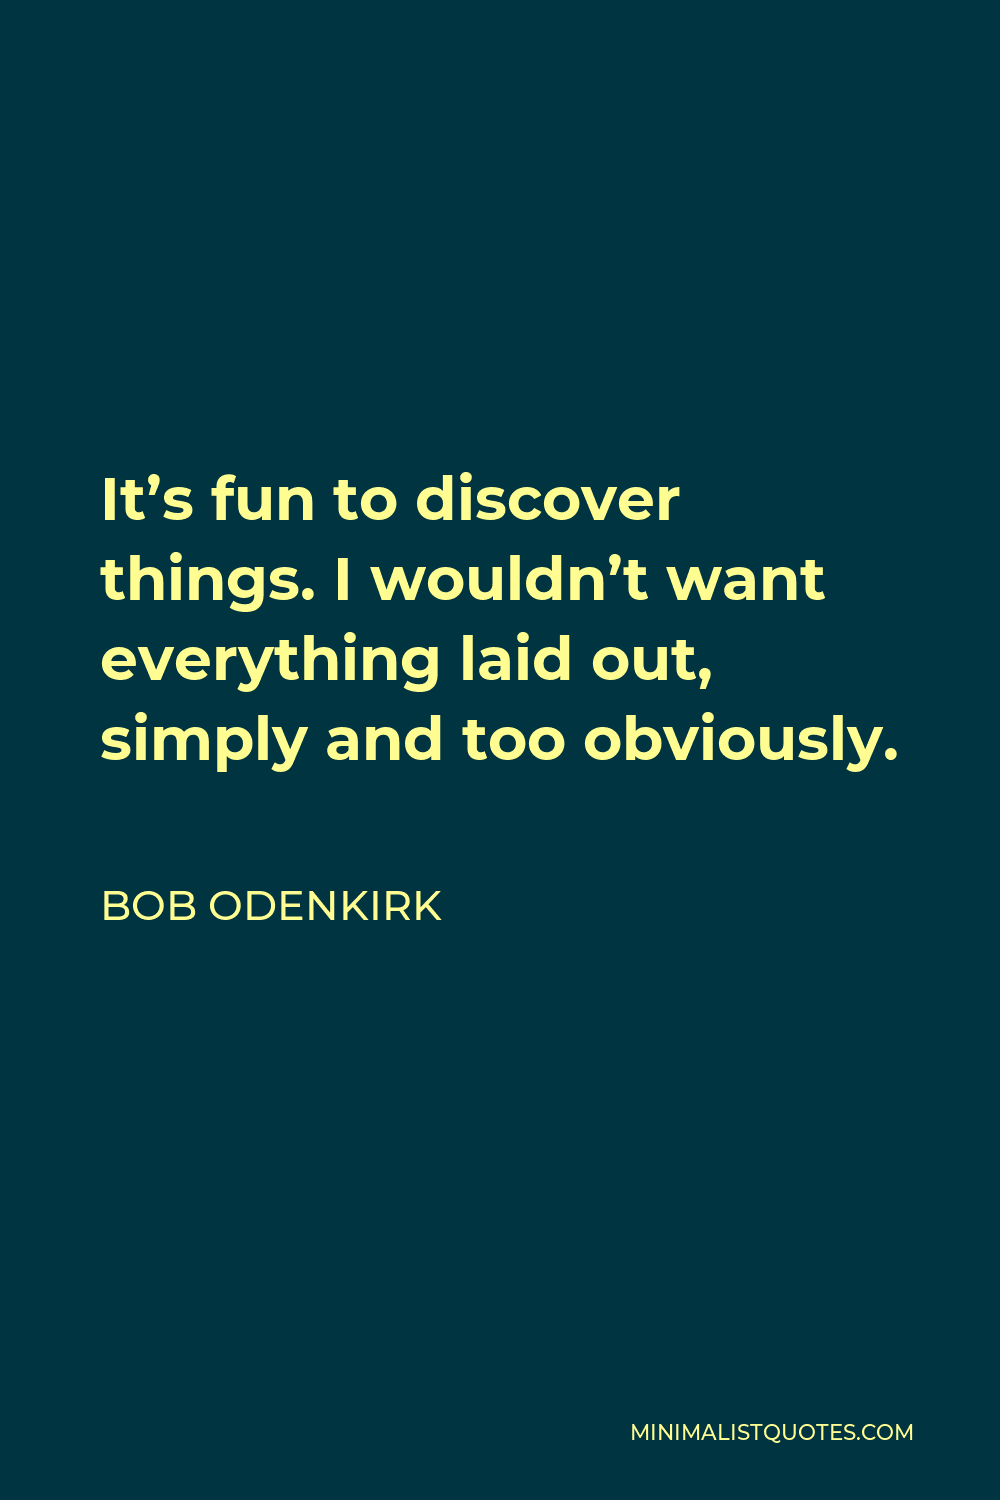 Bob Odenkirk Quote - It’s fun to discover things. I wouldn’t want everything laid out, simply and too obviously.